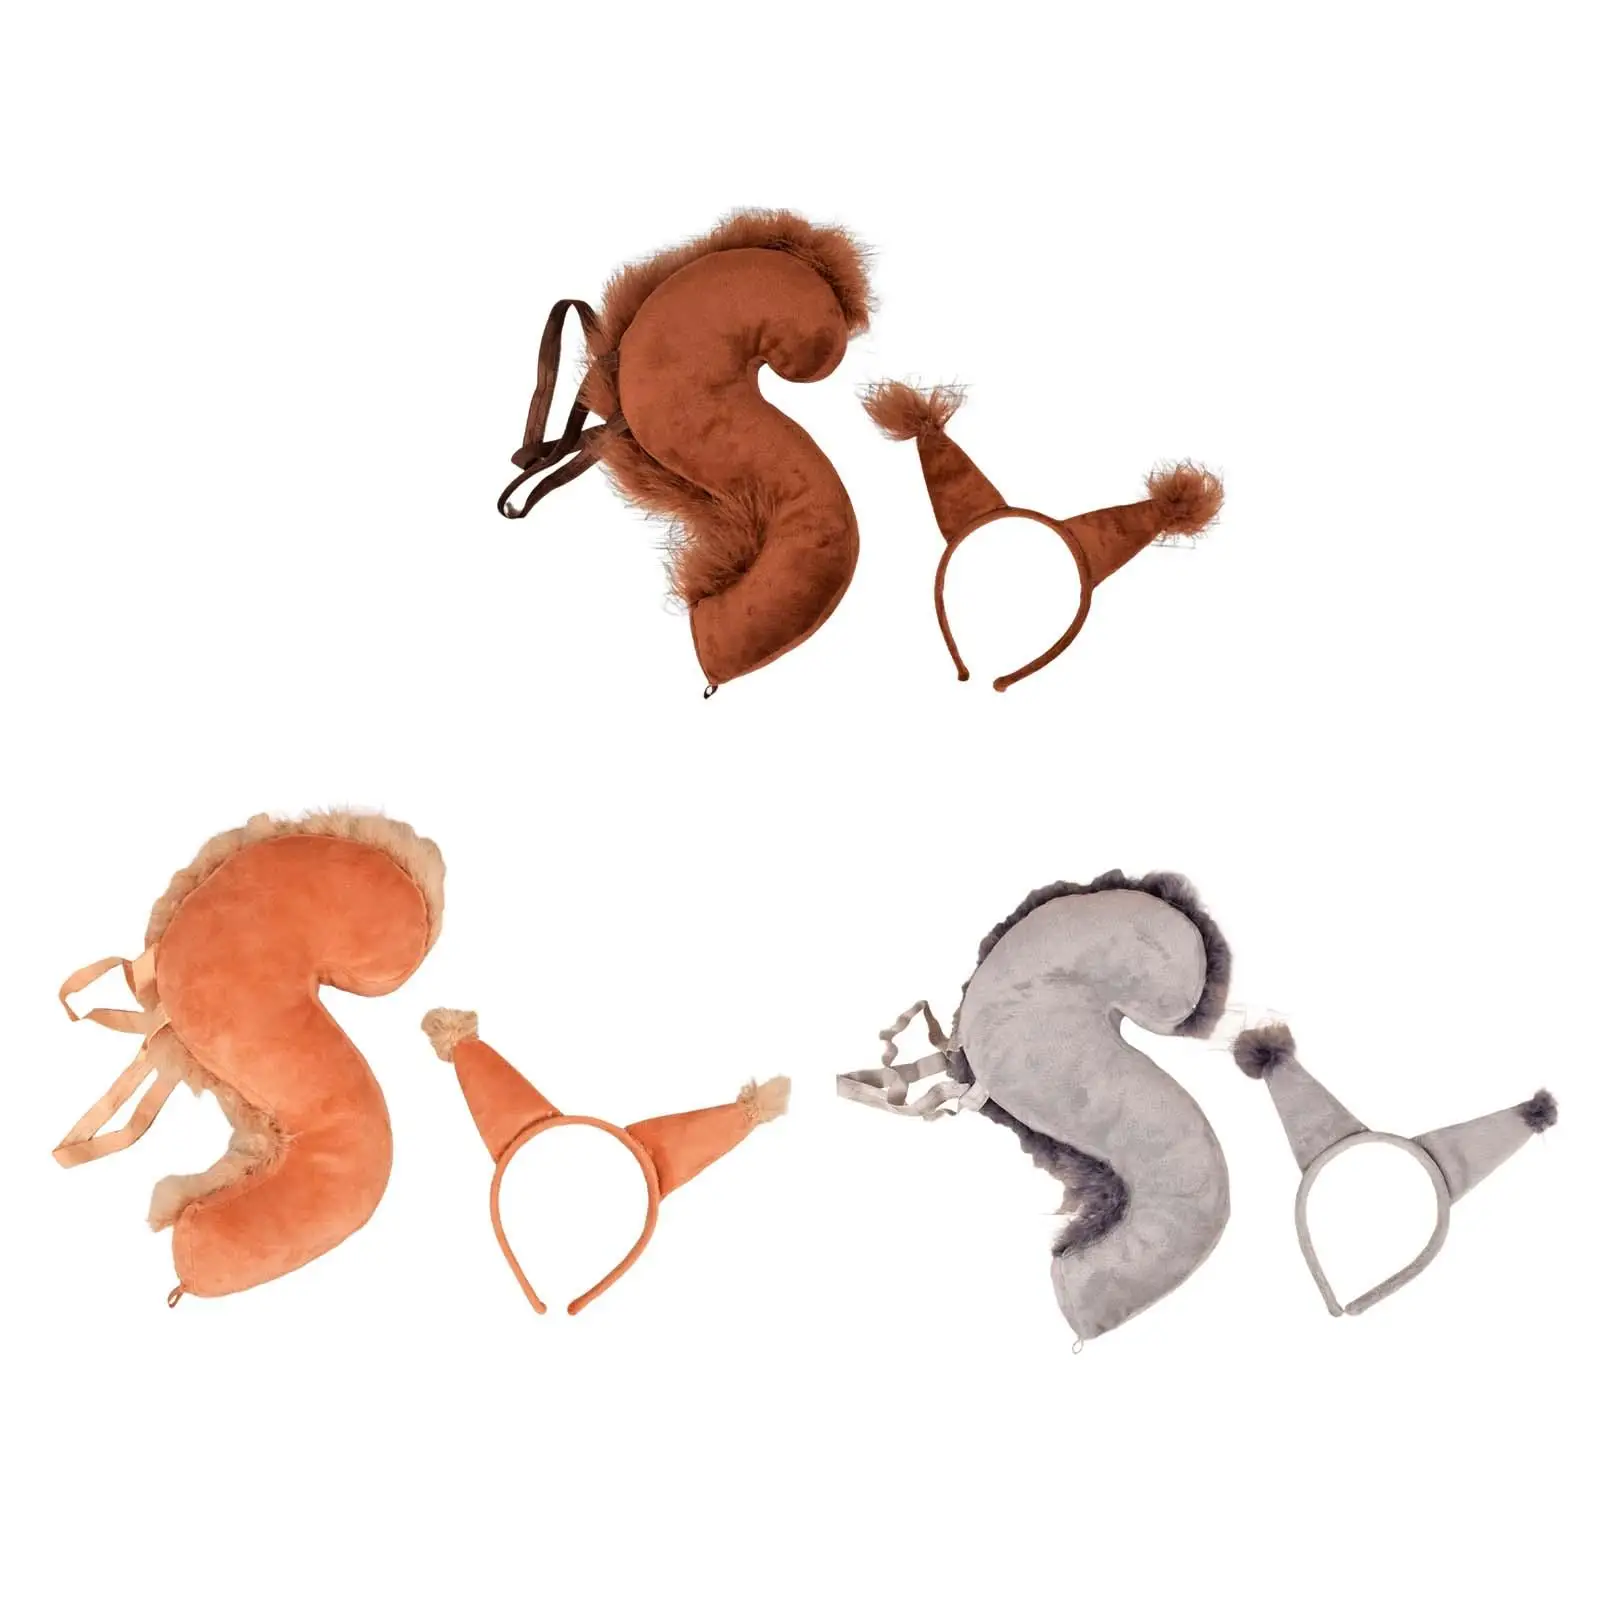 Animal Tail Costume Kit Cosplay Squirrel Ears Hair Hoop for Party Decoration Holiday Halloween Animal Themed Parties Boys Girls